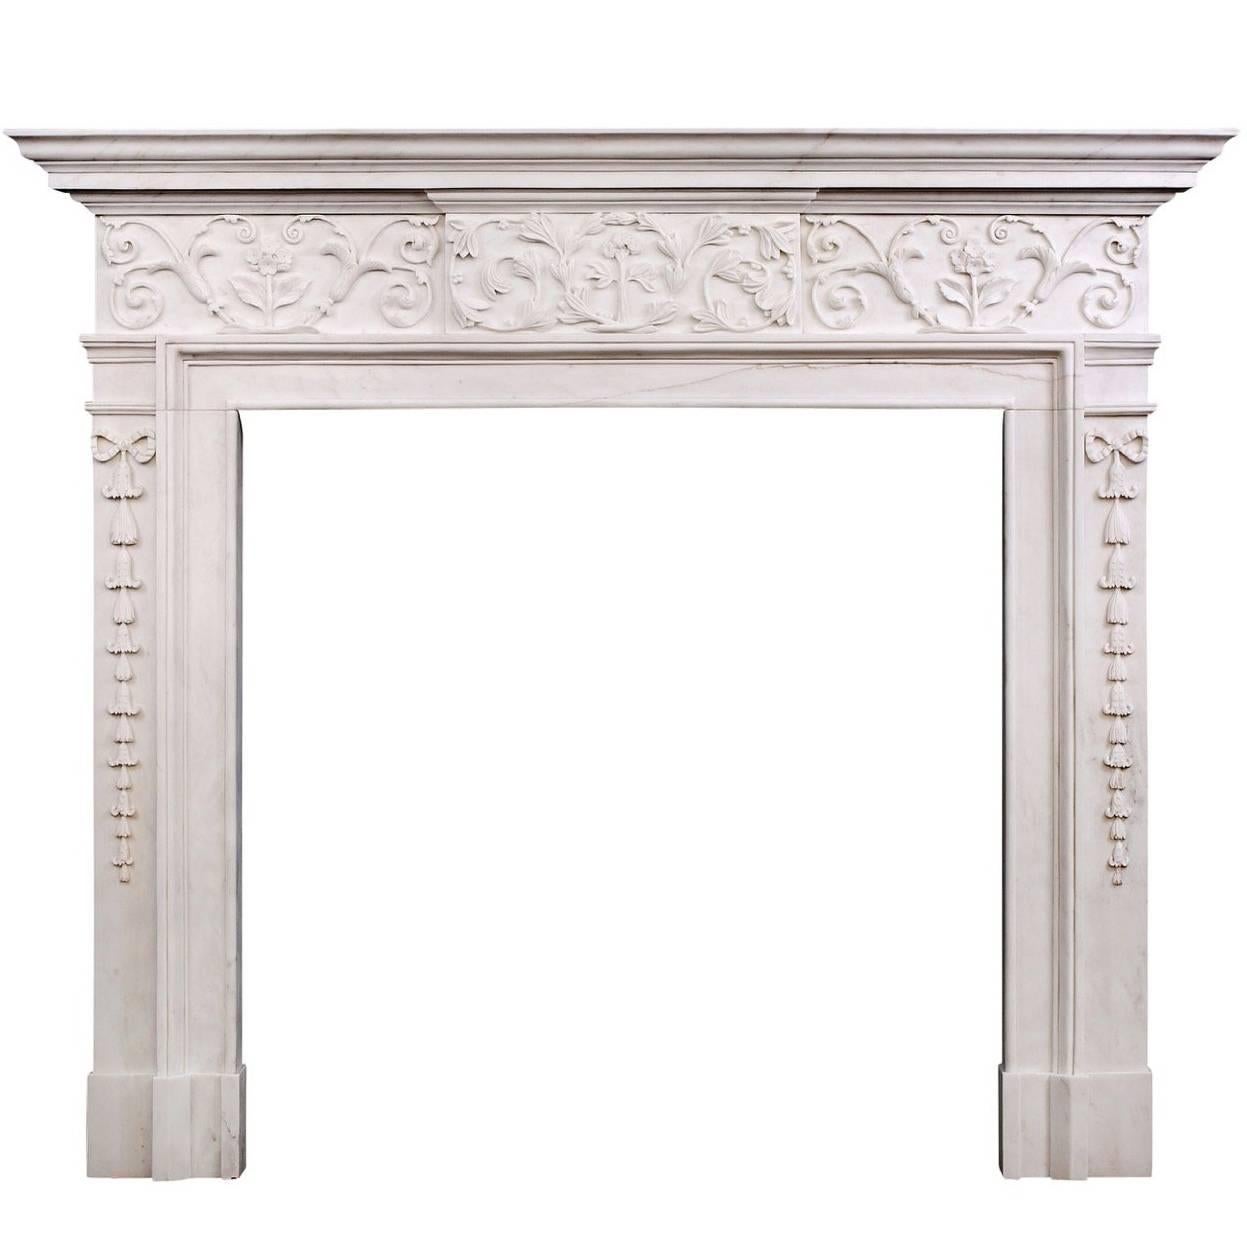 Attractive George III Style White Marble Fireplace For Sale